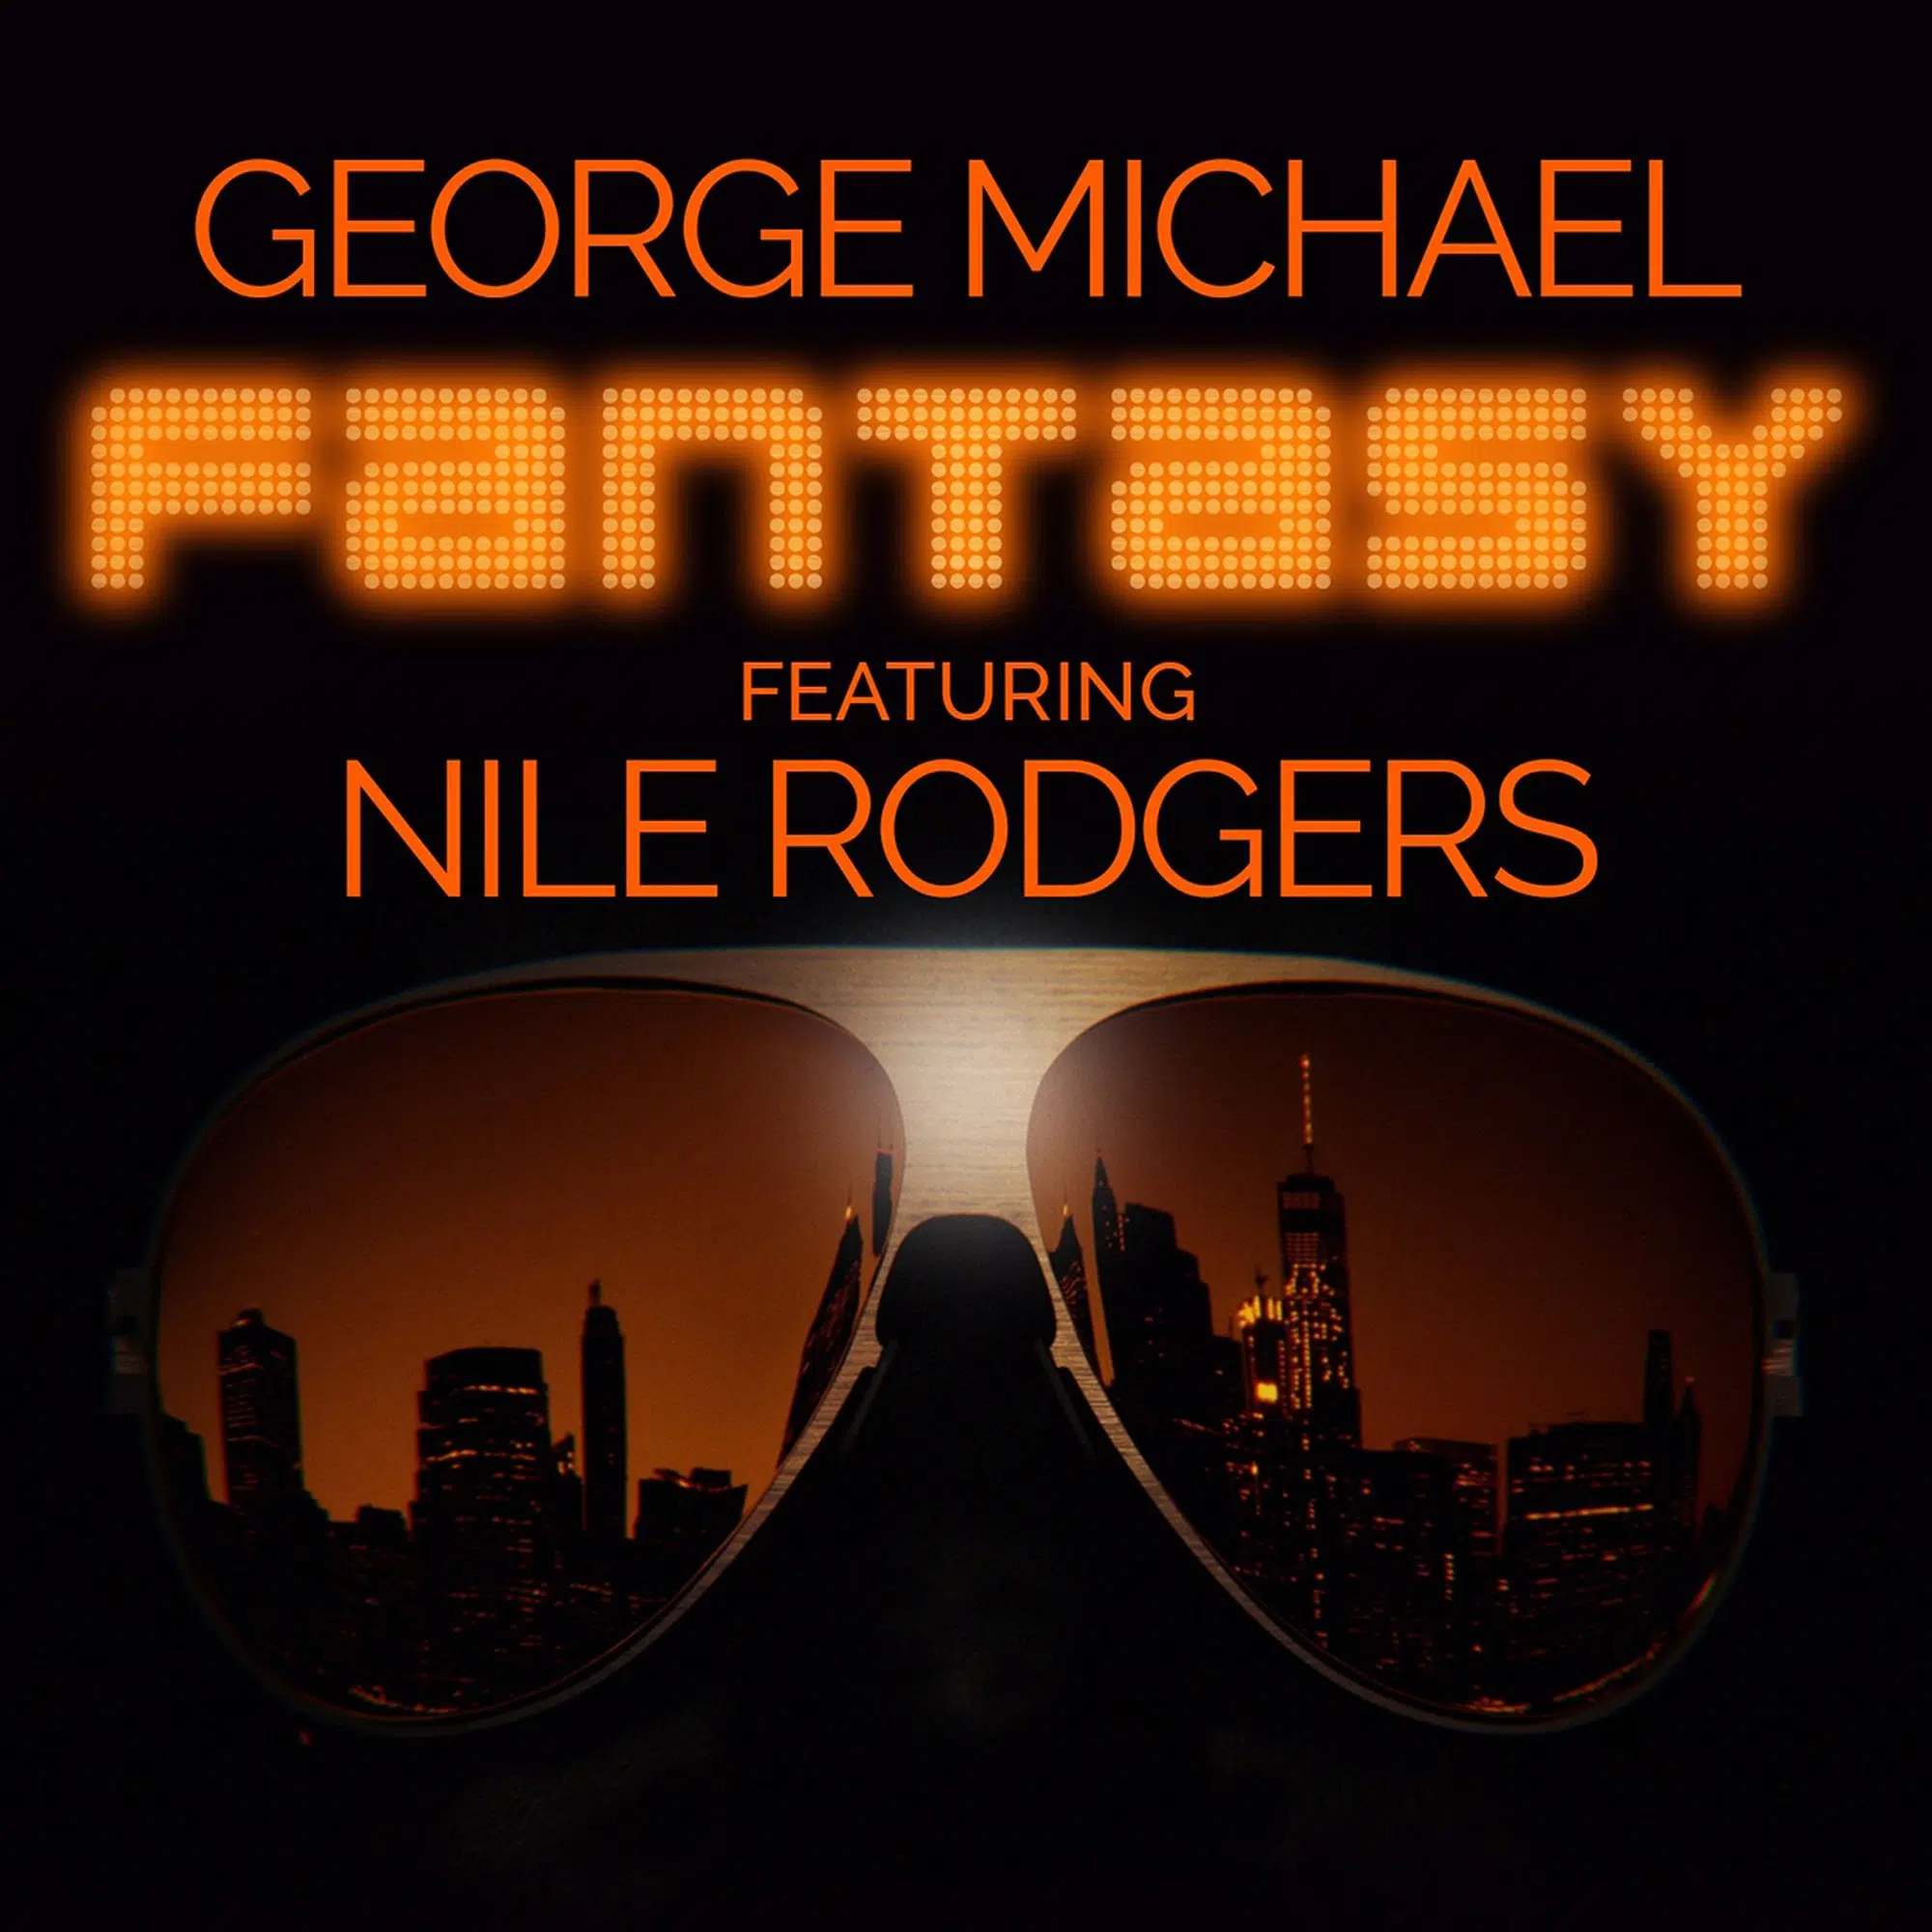 Listen to George Michael’s Posthumous New Song With Nile Rodgers “Fantasy”